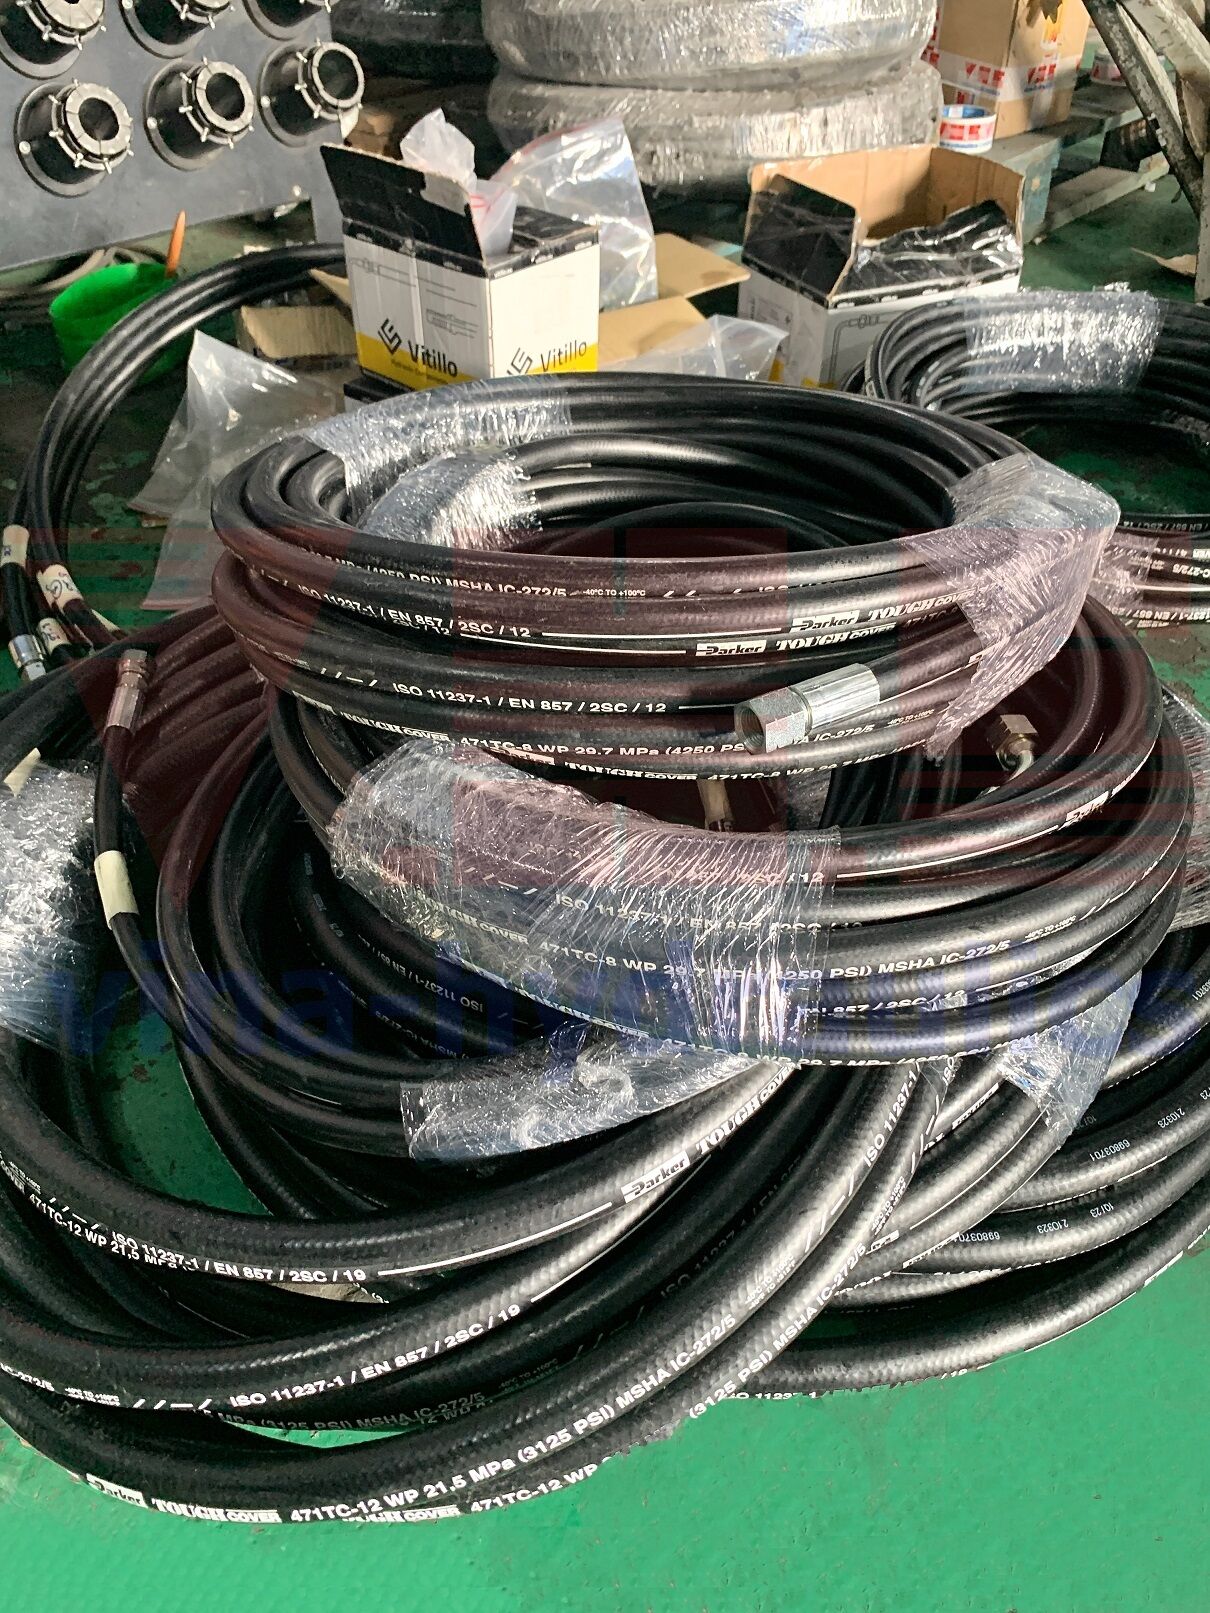 Genuine Parker hydraulic pneumatic hoses at good prices in Saigon